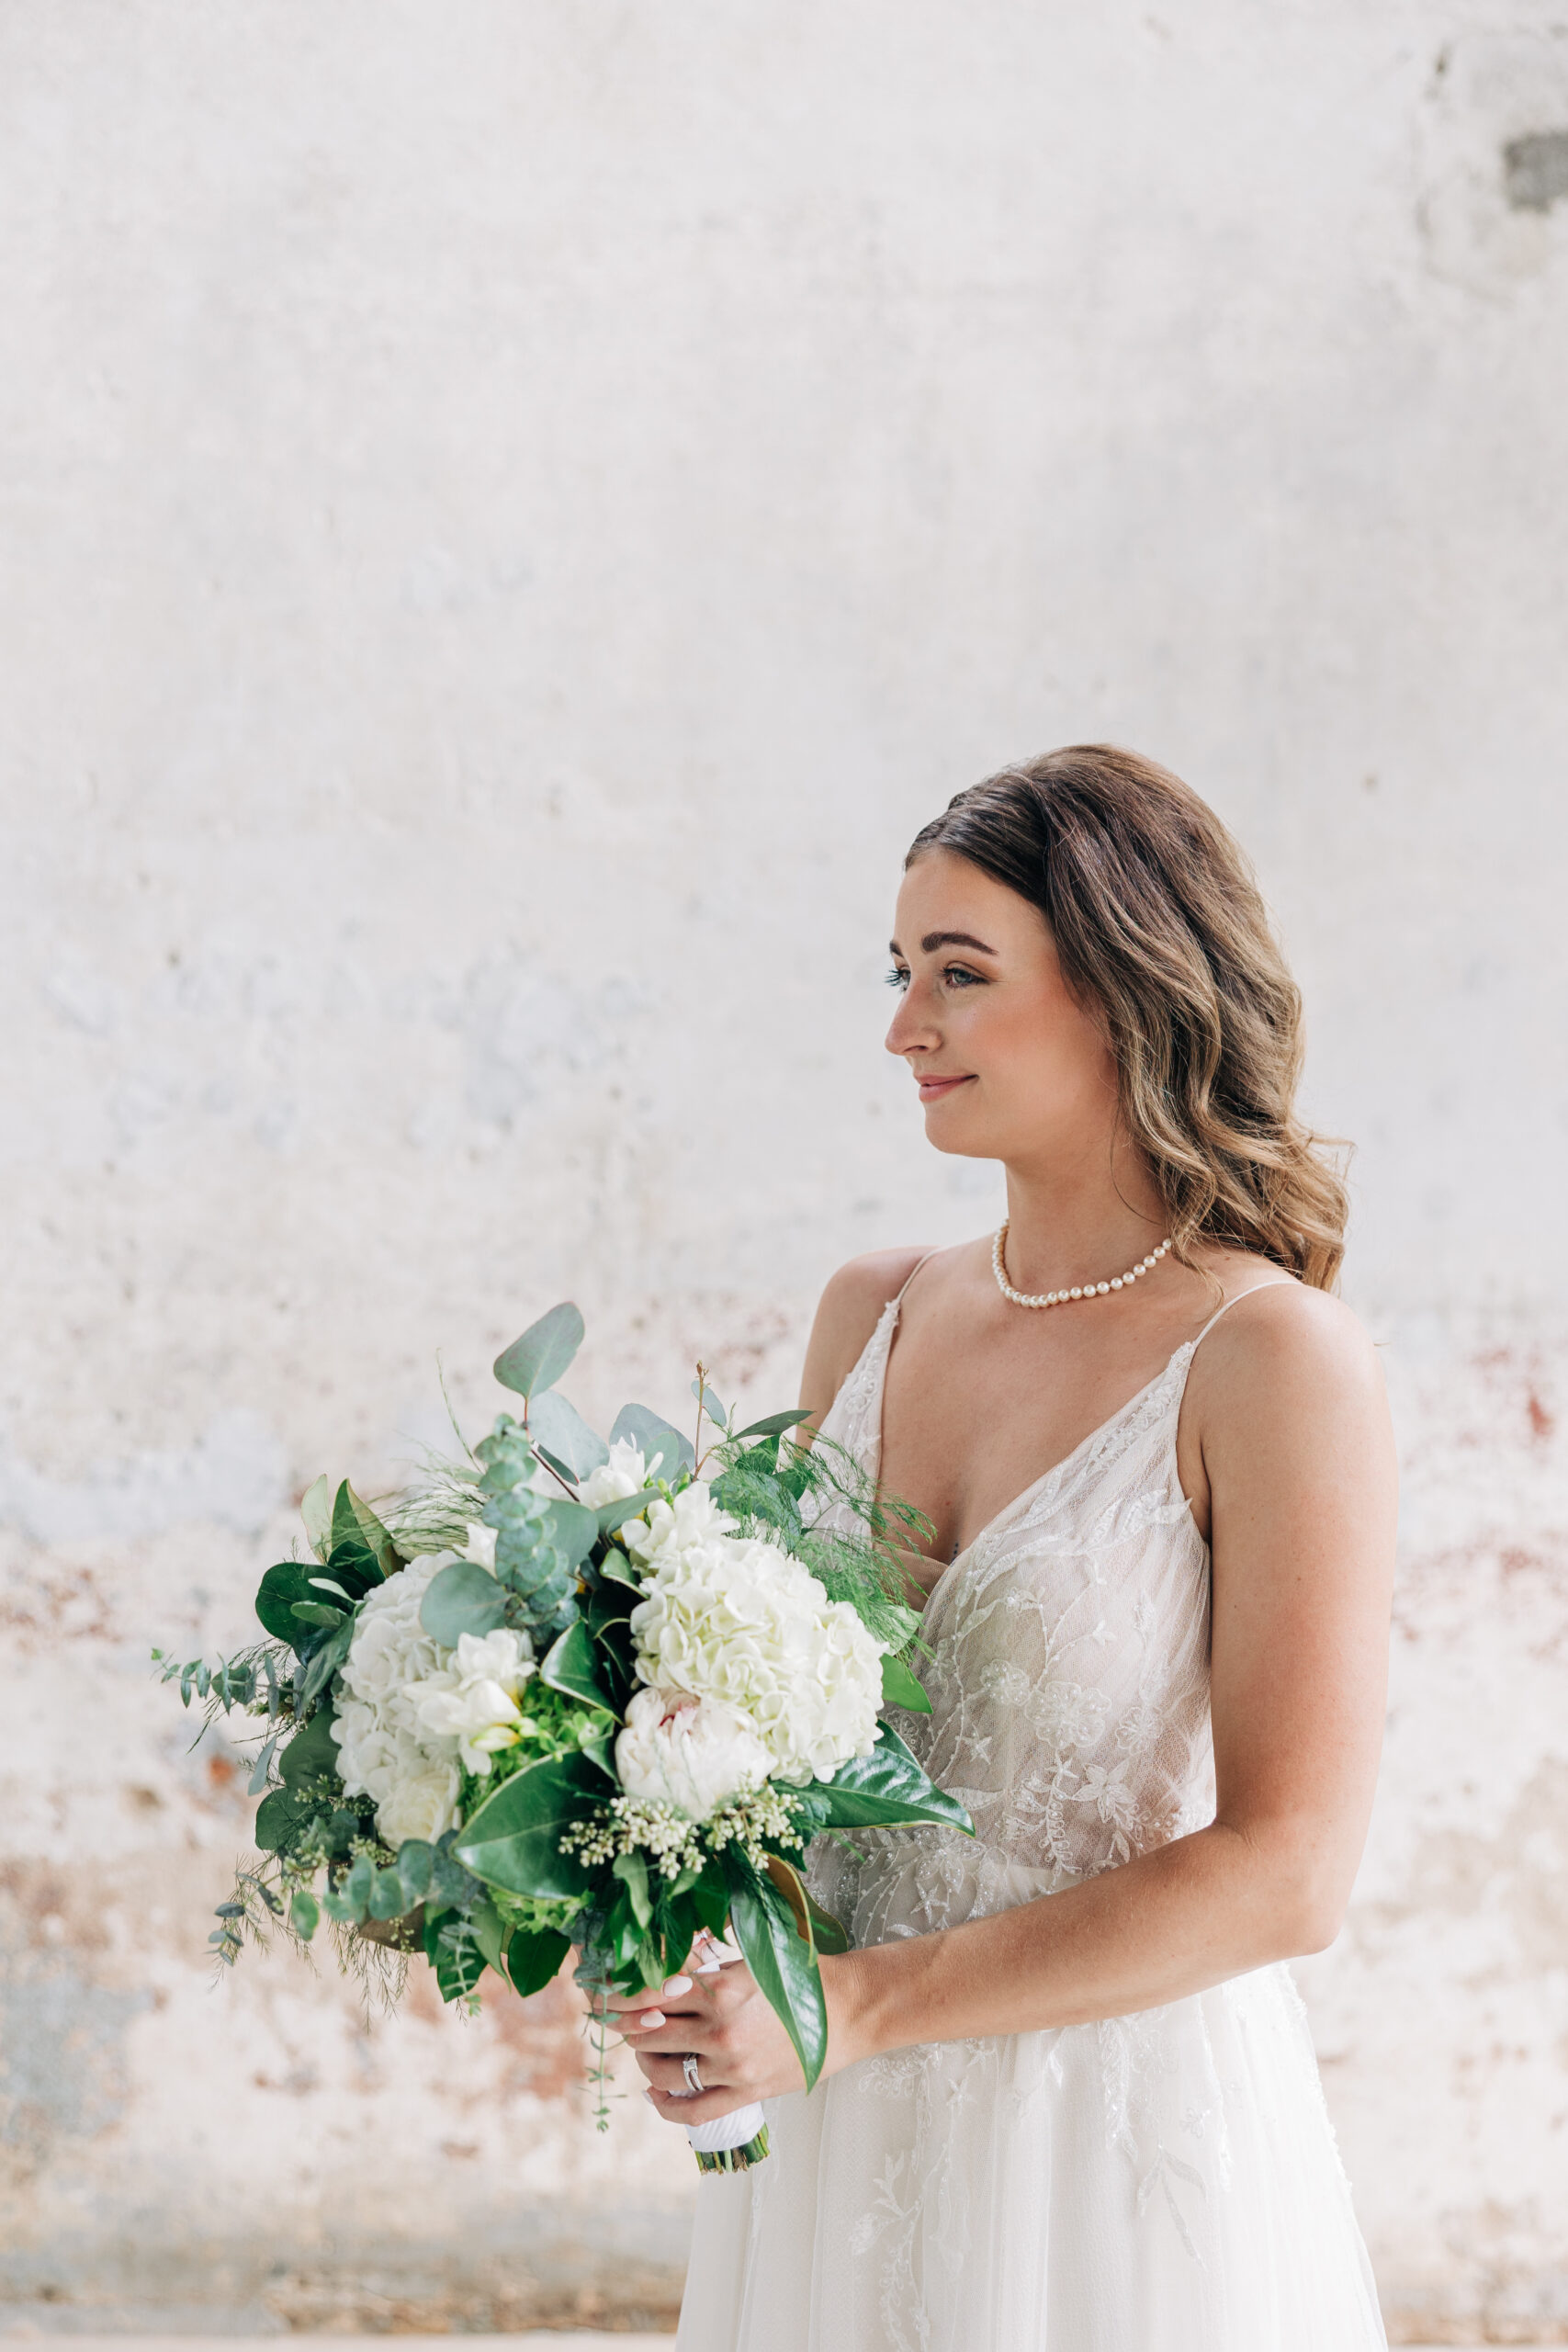 A bride smiles while holding her white bouquet in a lace dress in a rustic building